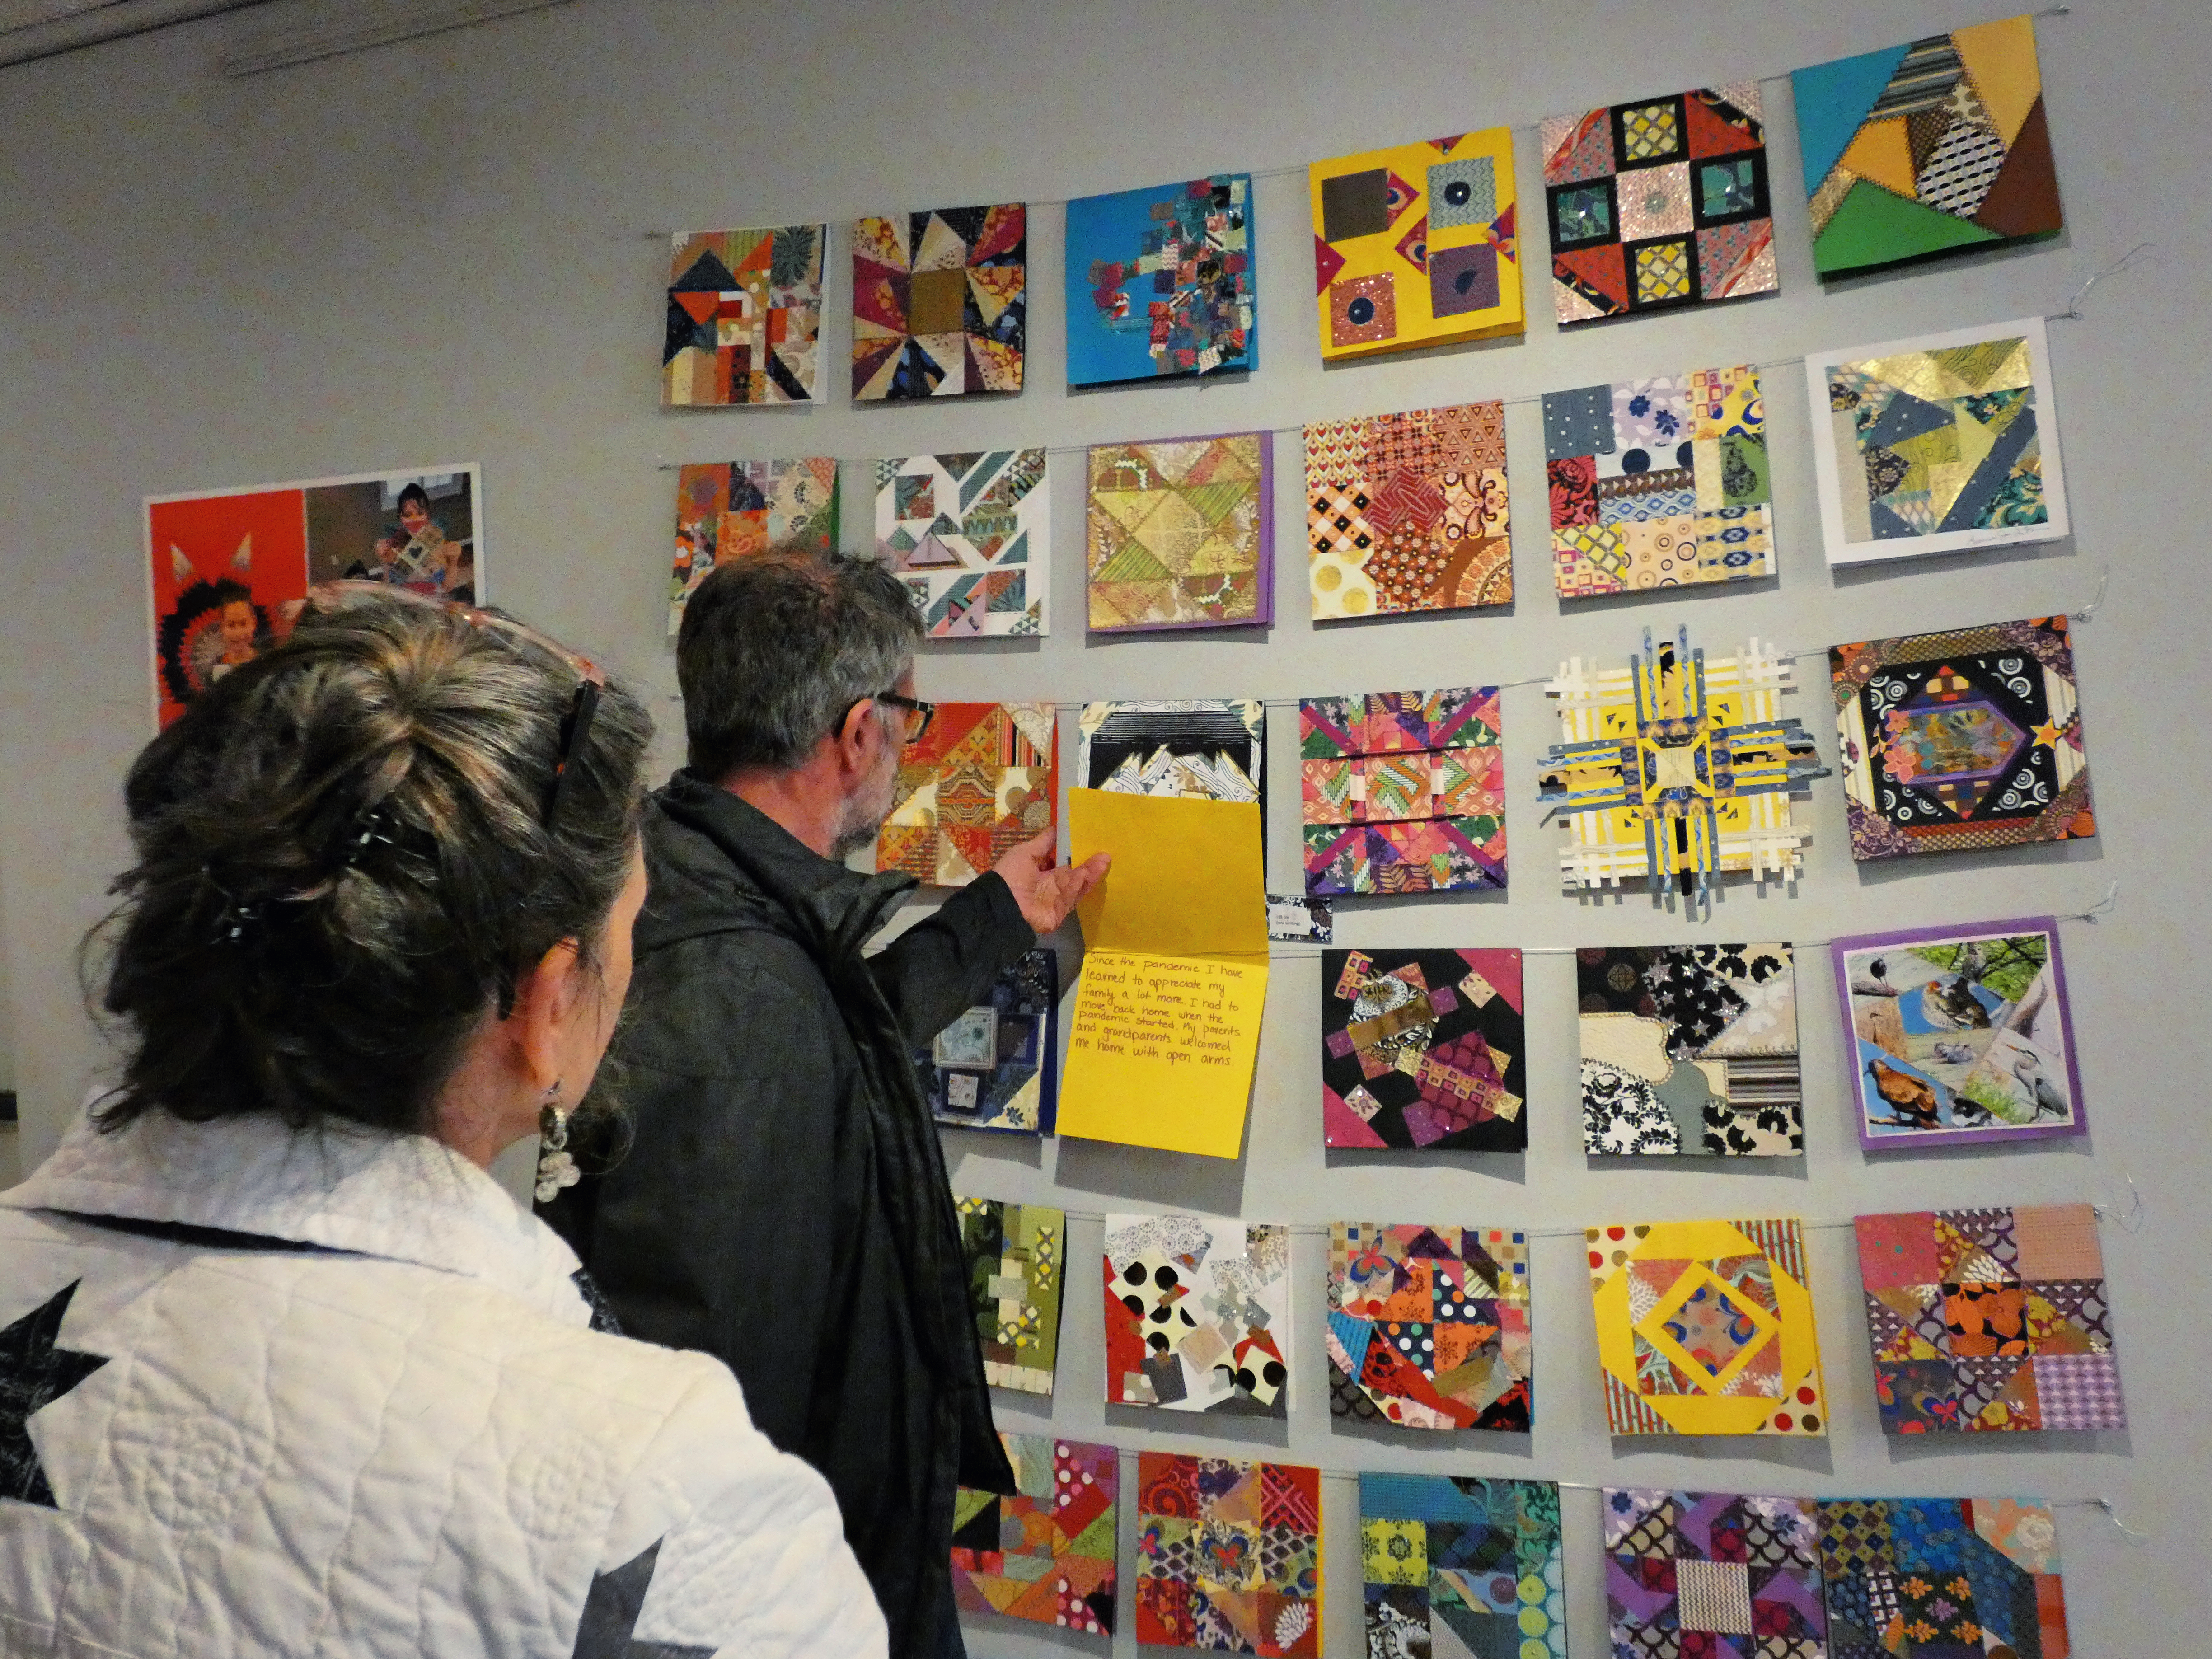 A person holds open an artwork mounted on a gallery wall. It is a part of an installation with other similar card-like colorful and patterned works of paper. They are all strung by thread in rows.